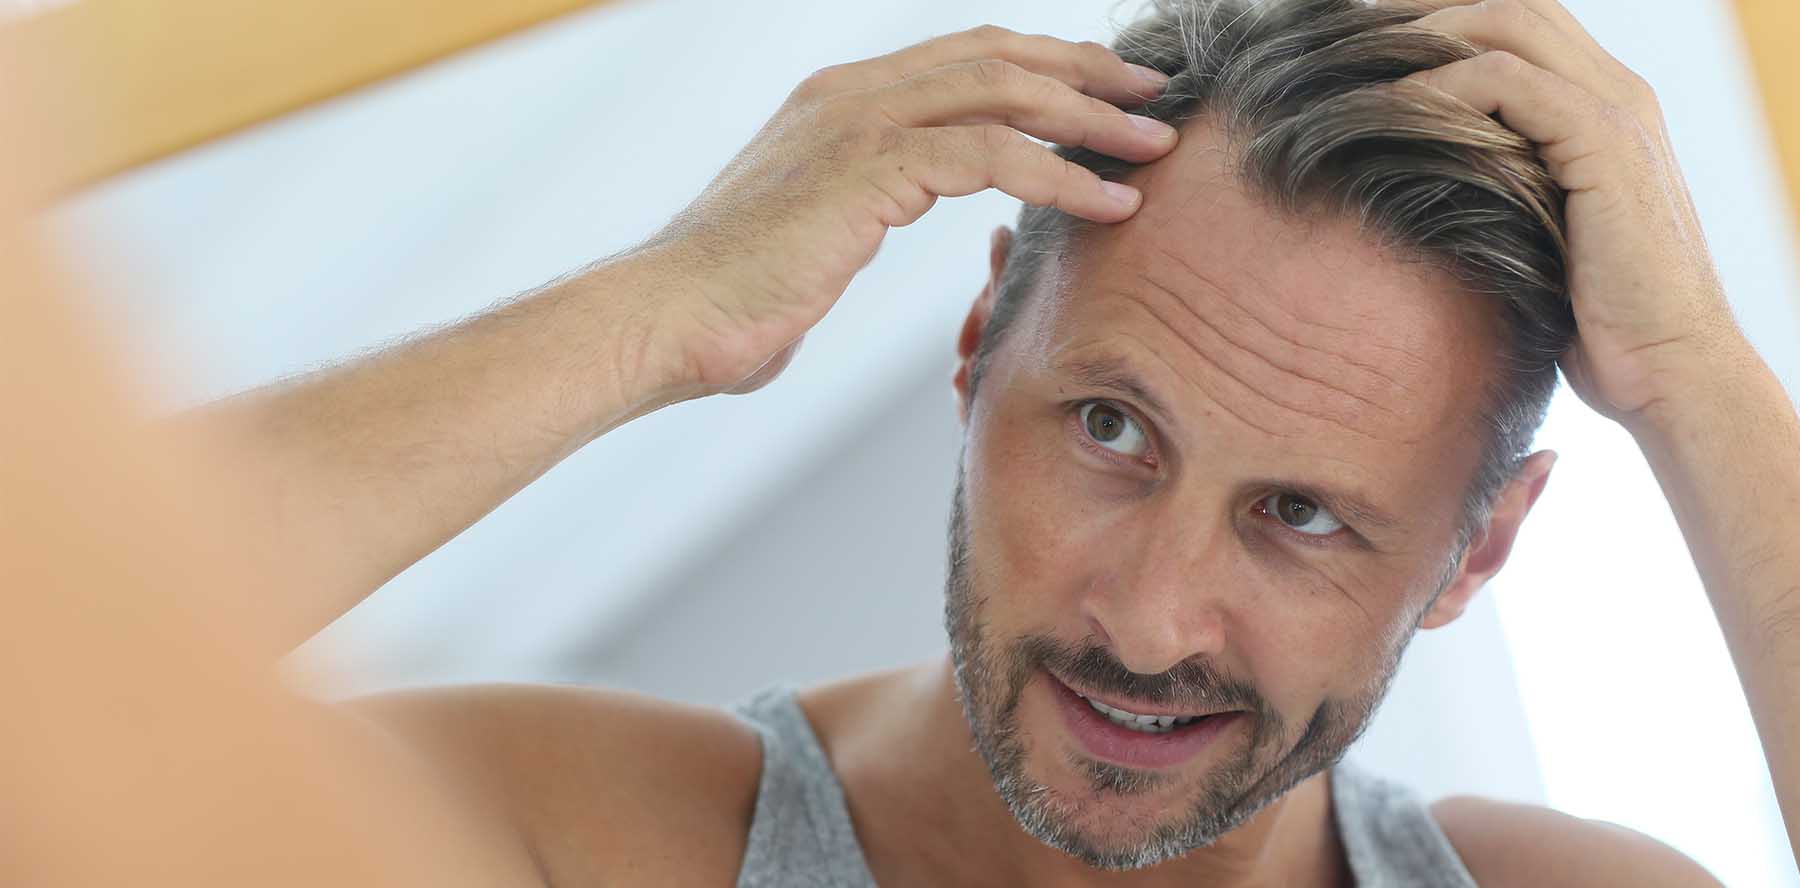 Higher than normal levels of DHT slowly miniaturize the hair follicles with time and causes the loss of hair permanently. The receding hairline typically shows a horseshoe shaped pattern in men and a bald patch on crown for women.